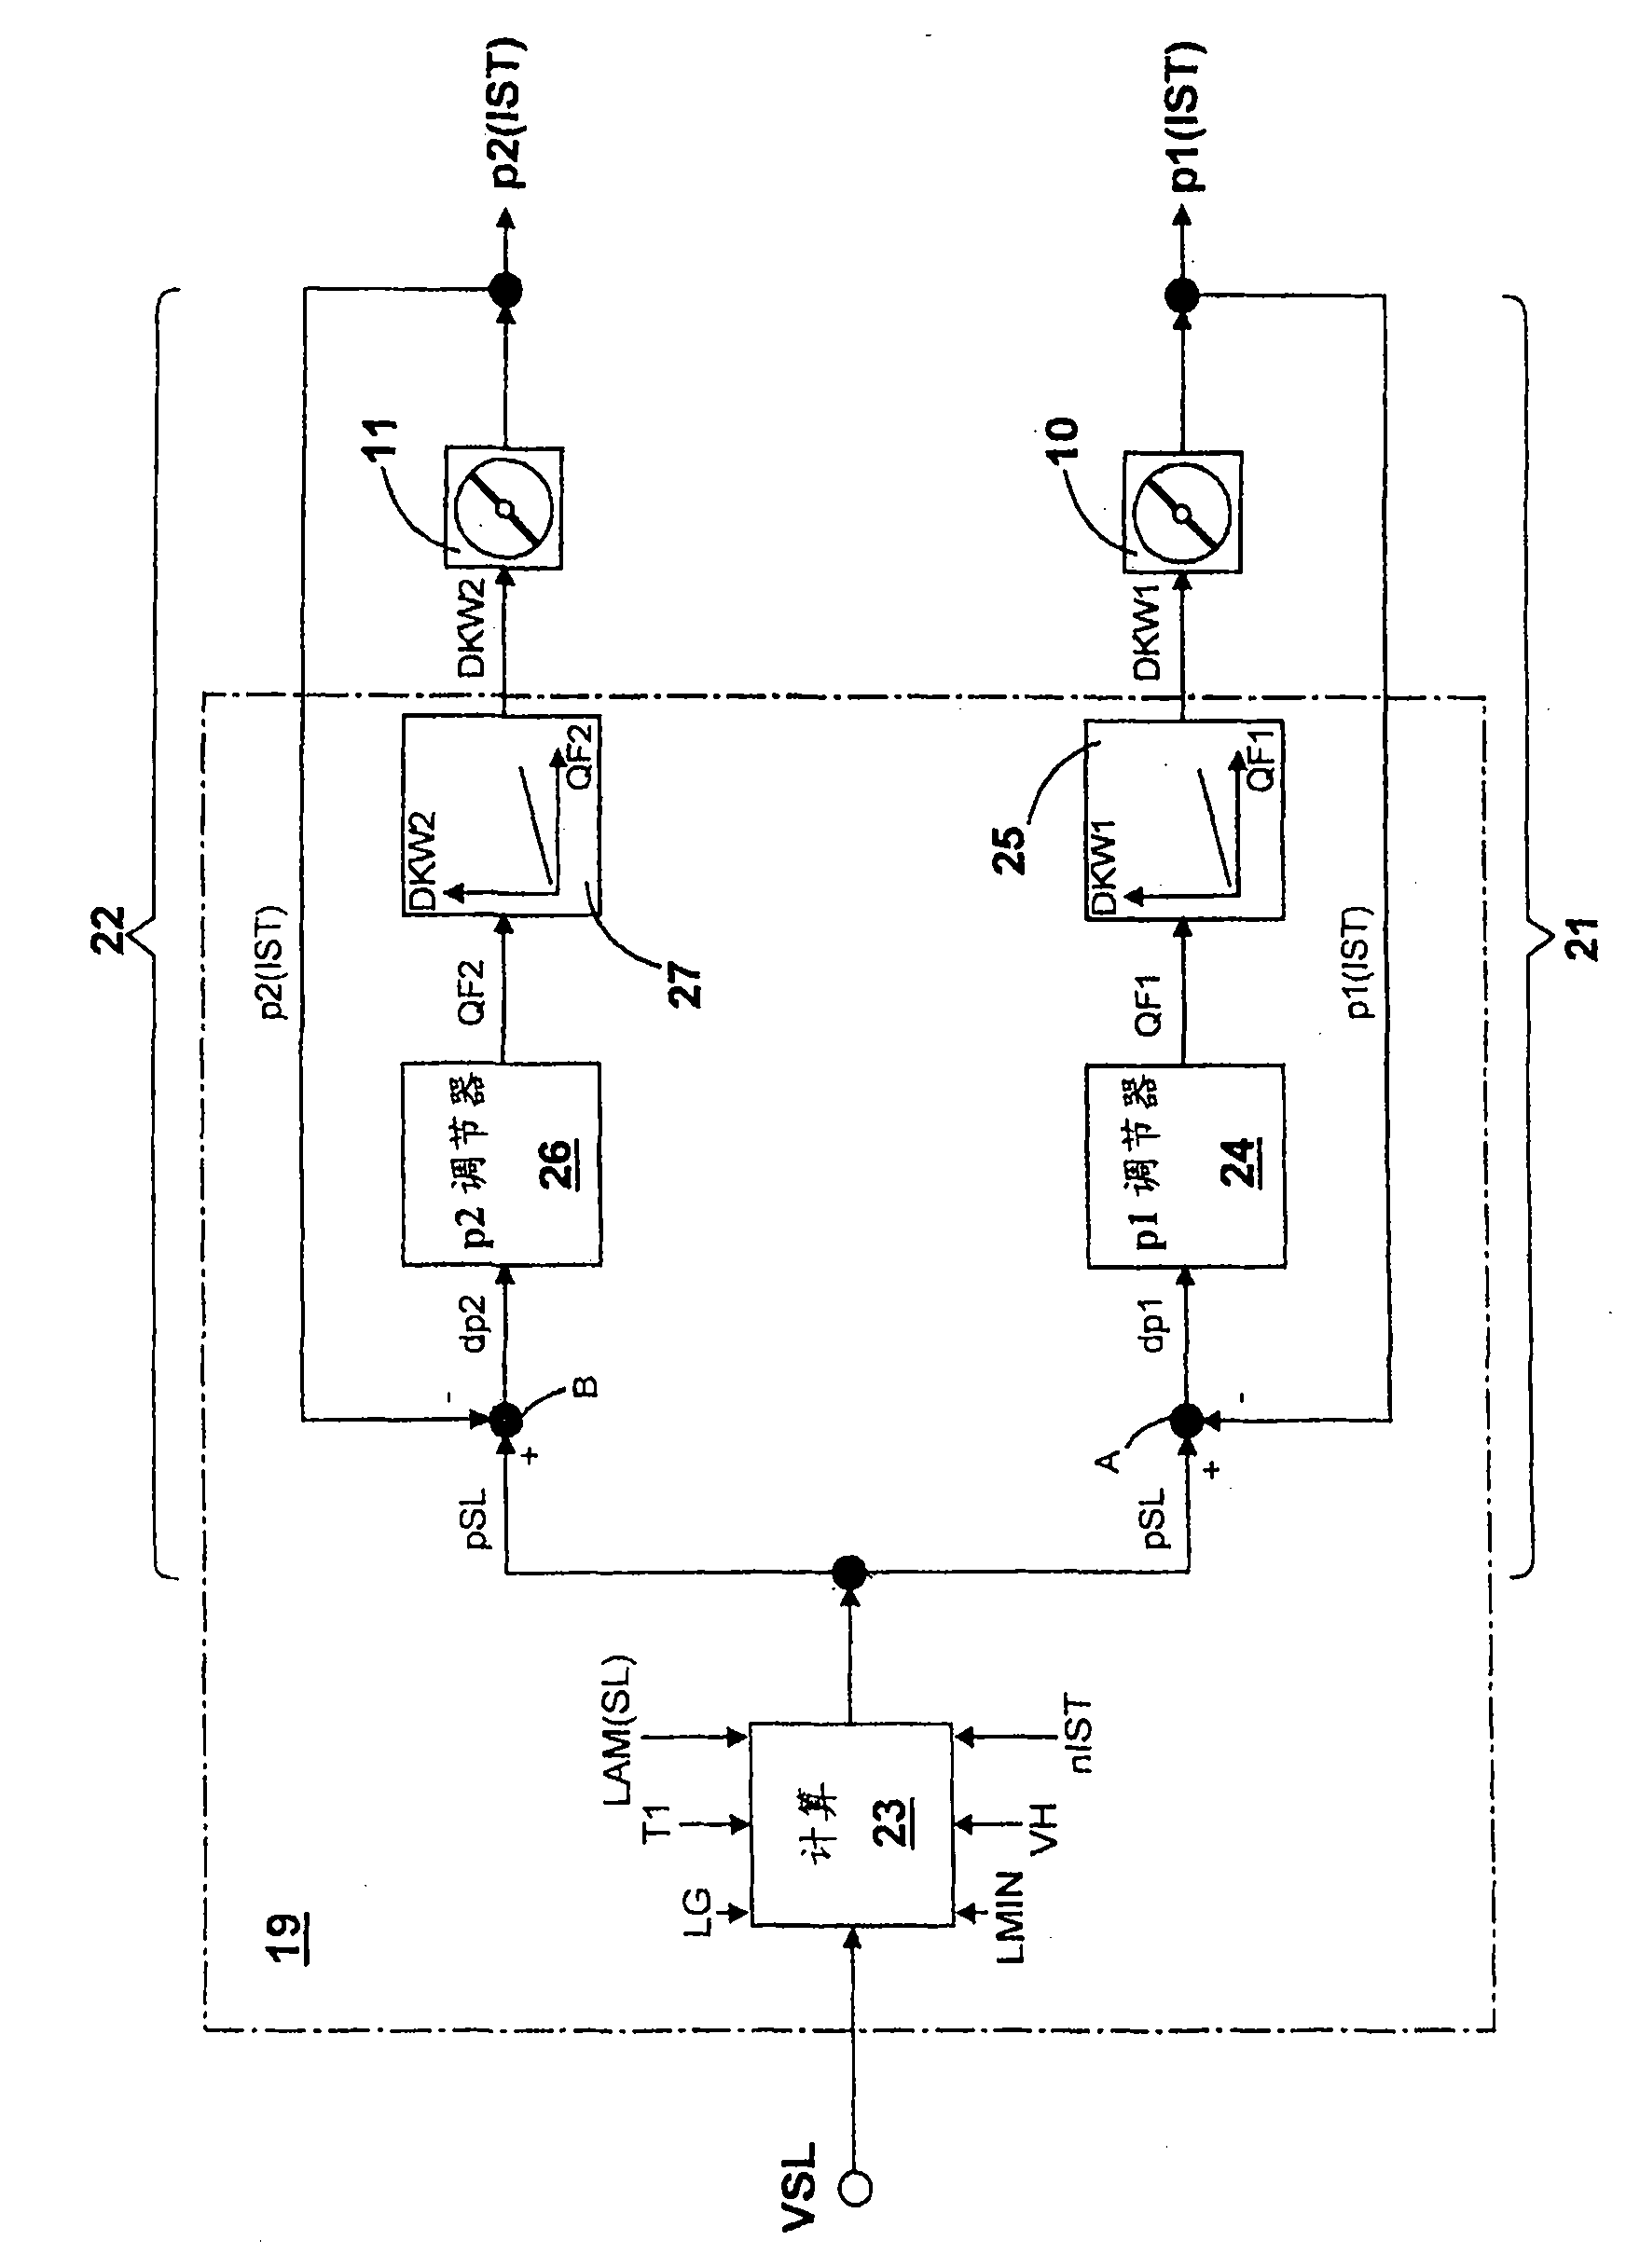 Method for controlling a stationary gas motor